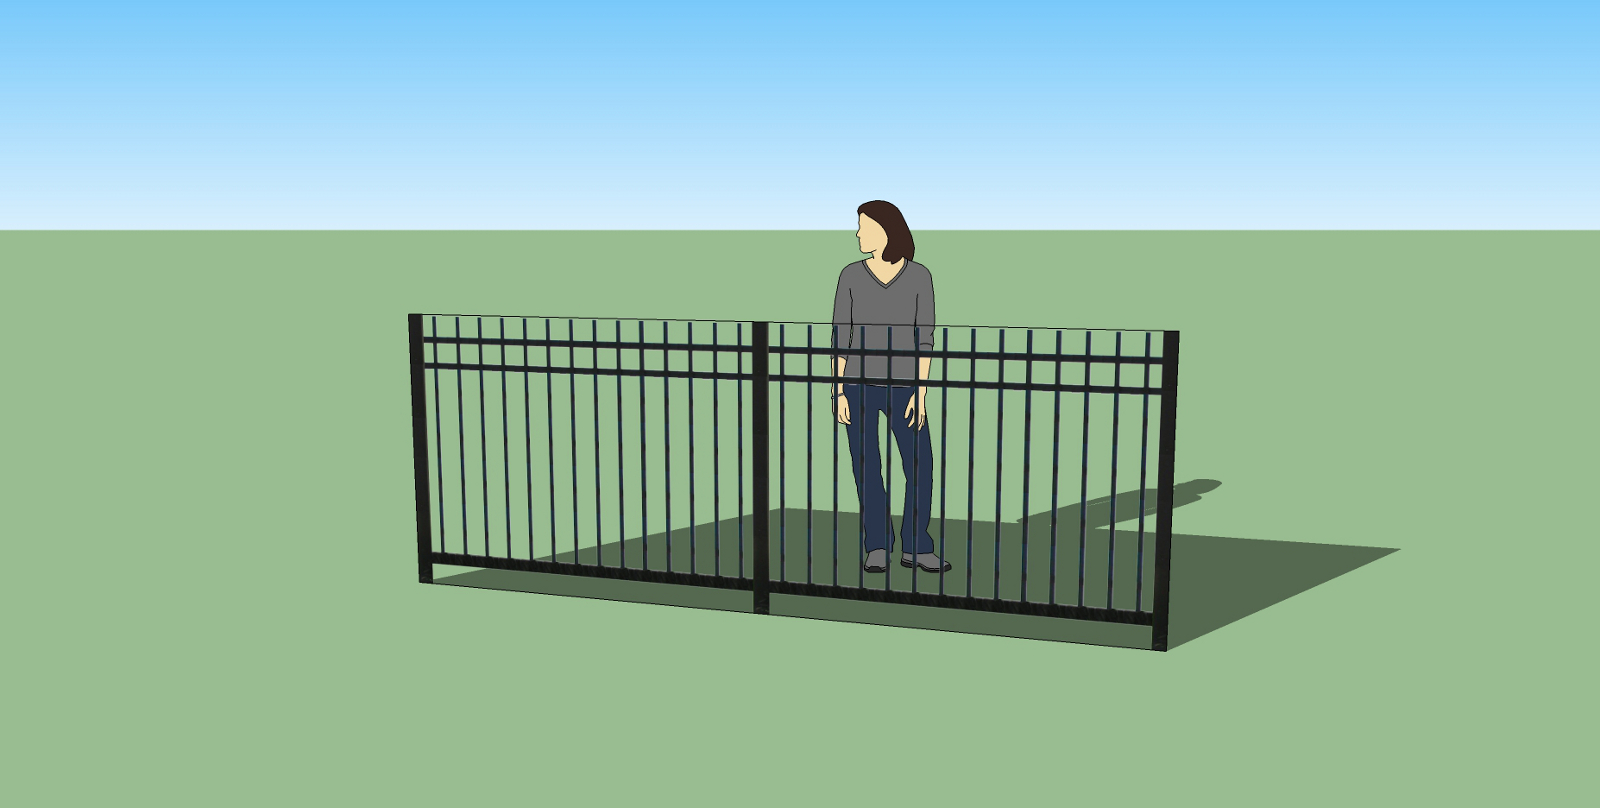 Here's an example of the problem. The shadow is not being cast by the fence texture but by the poly